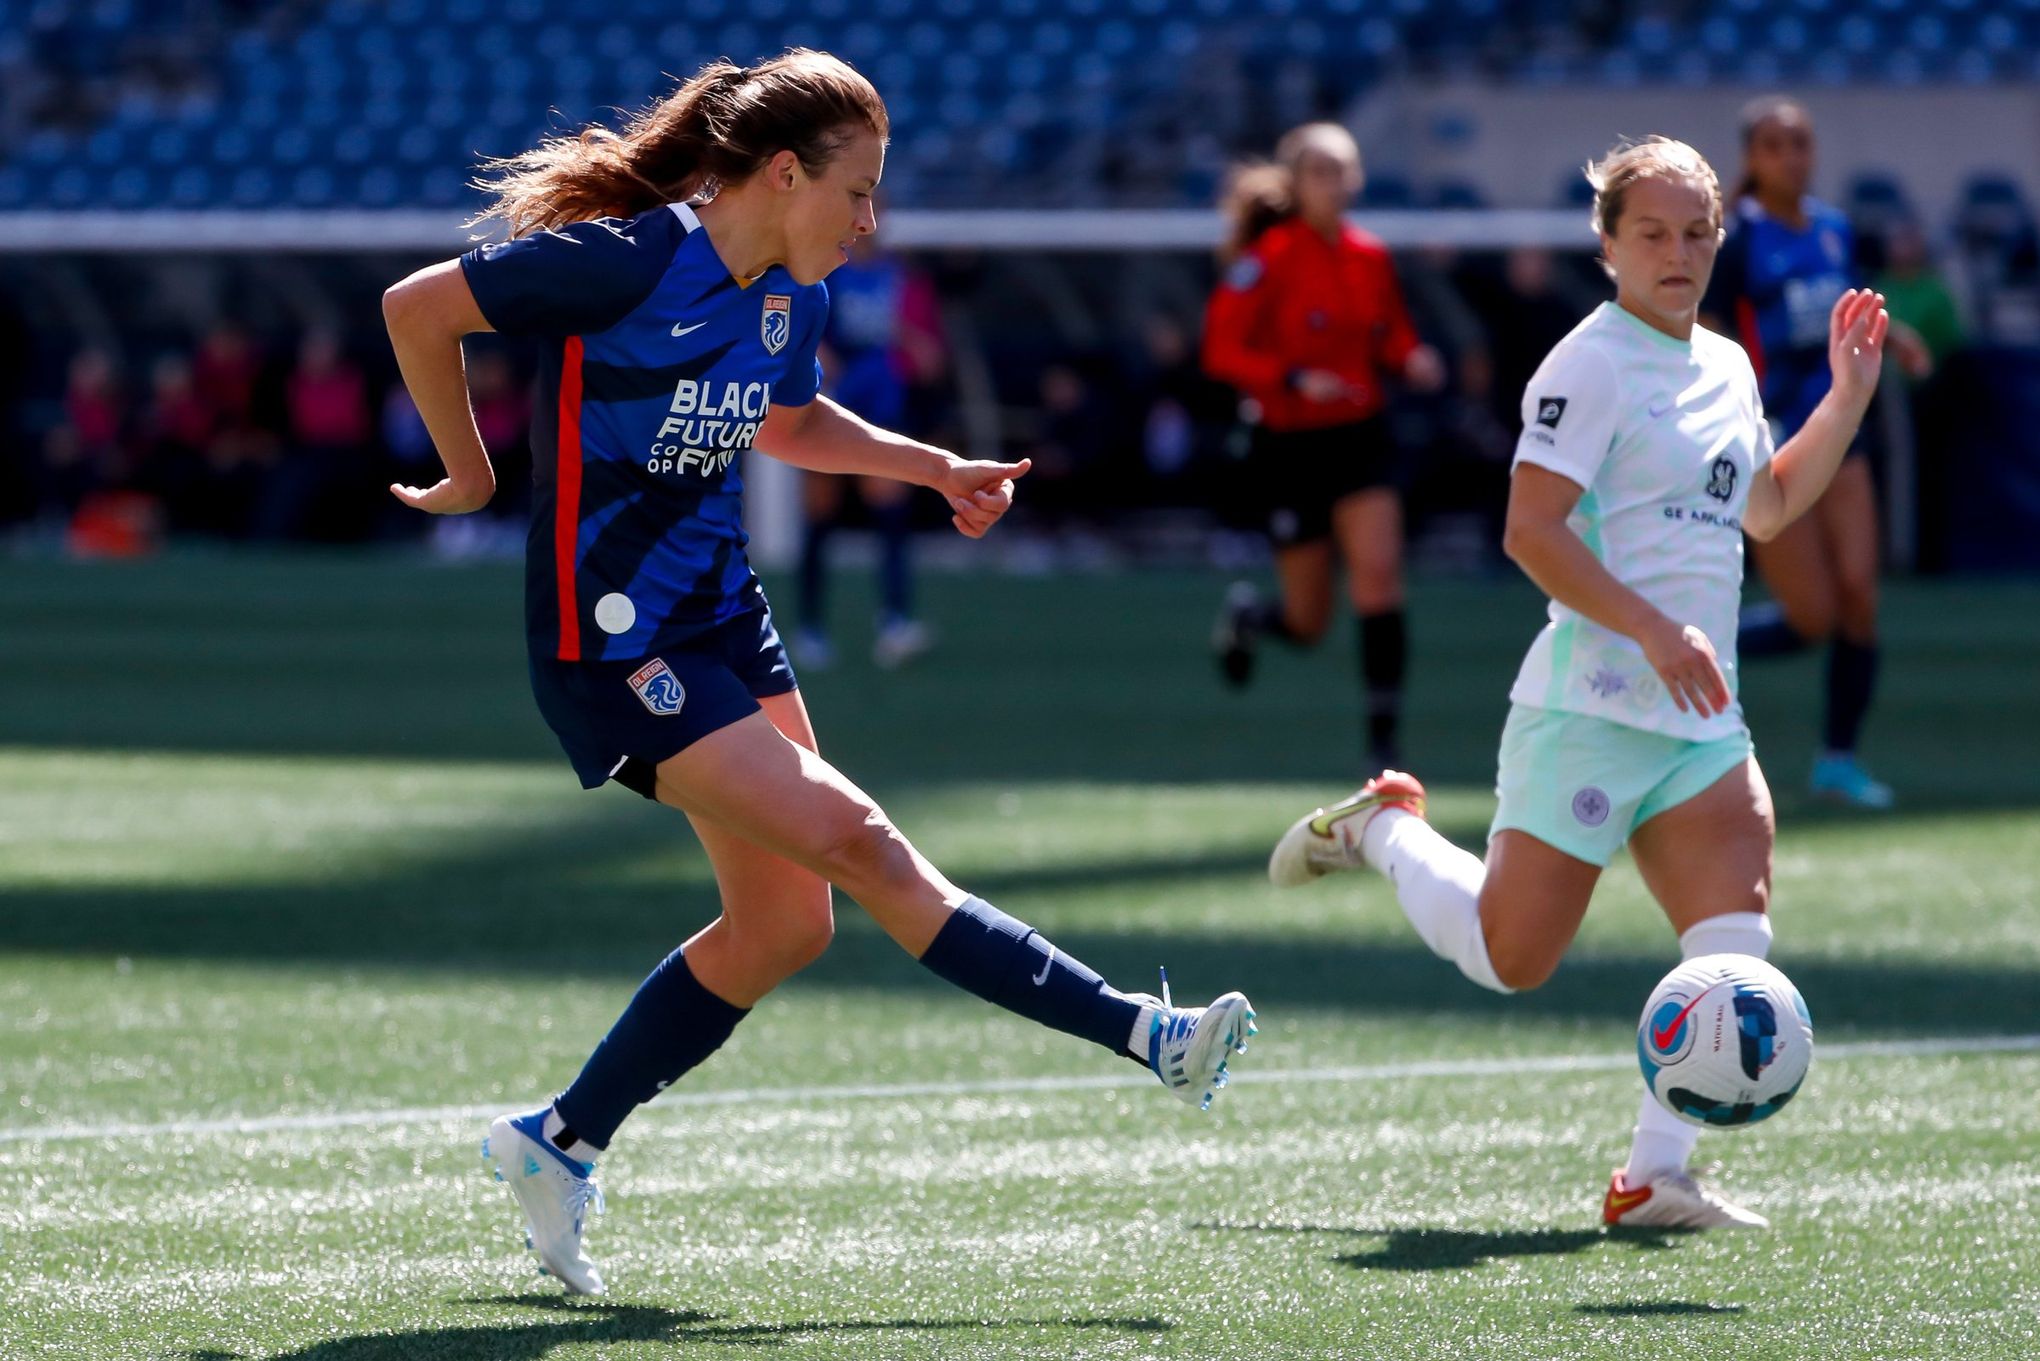 OL Reign and Washington Spirit play to a goalless draw in Seattle